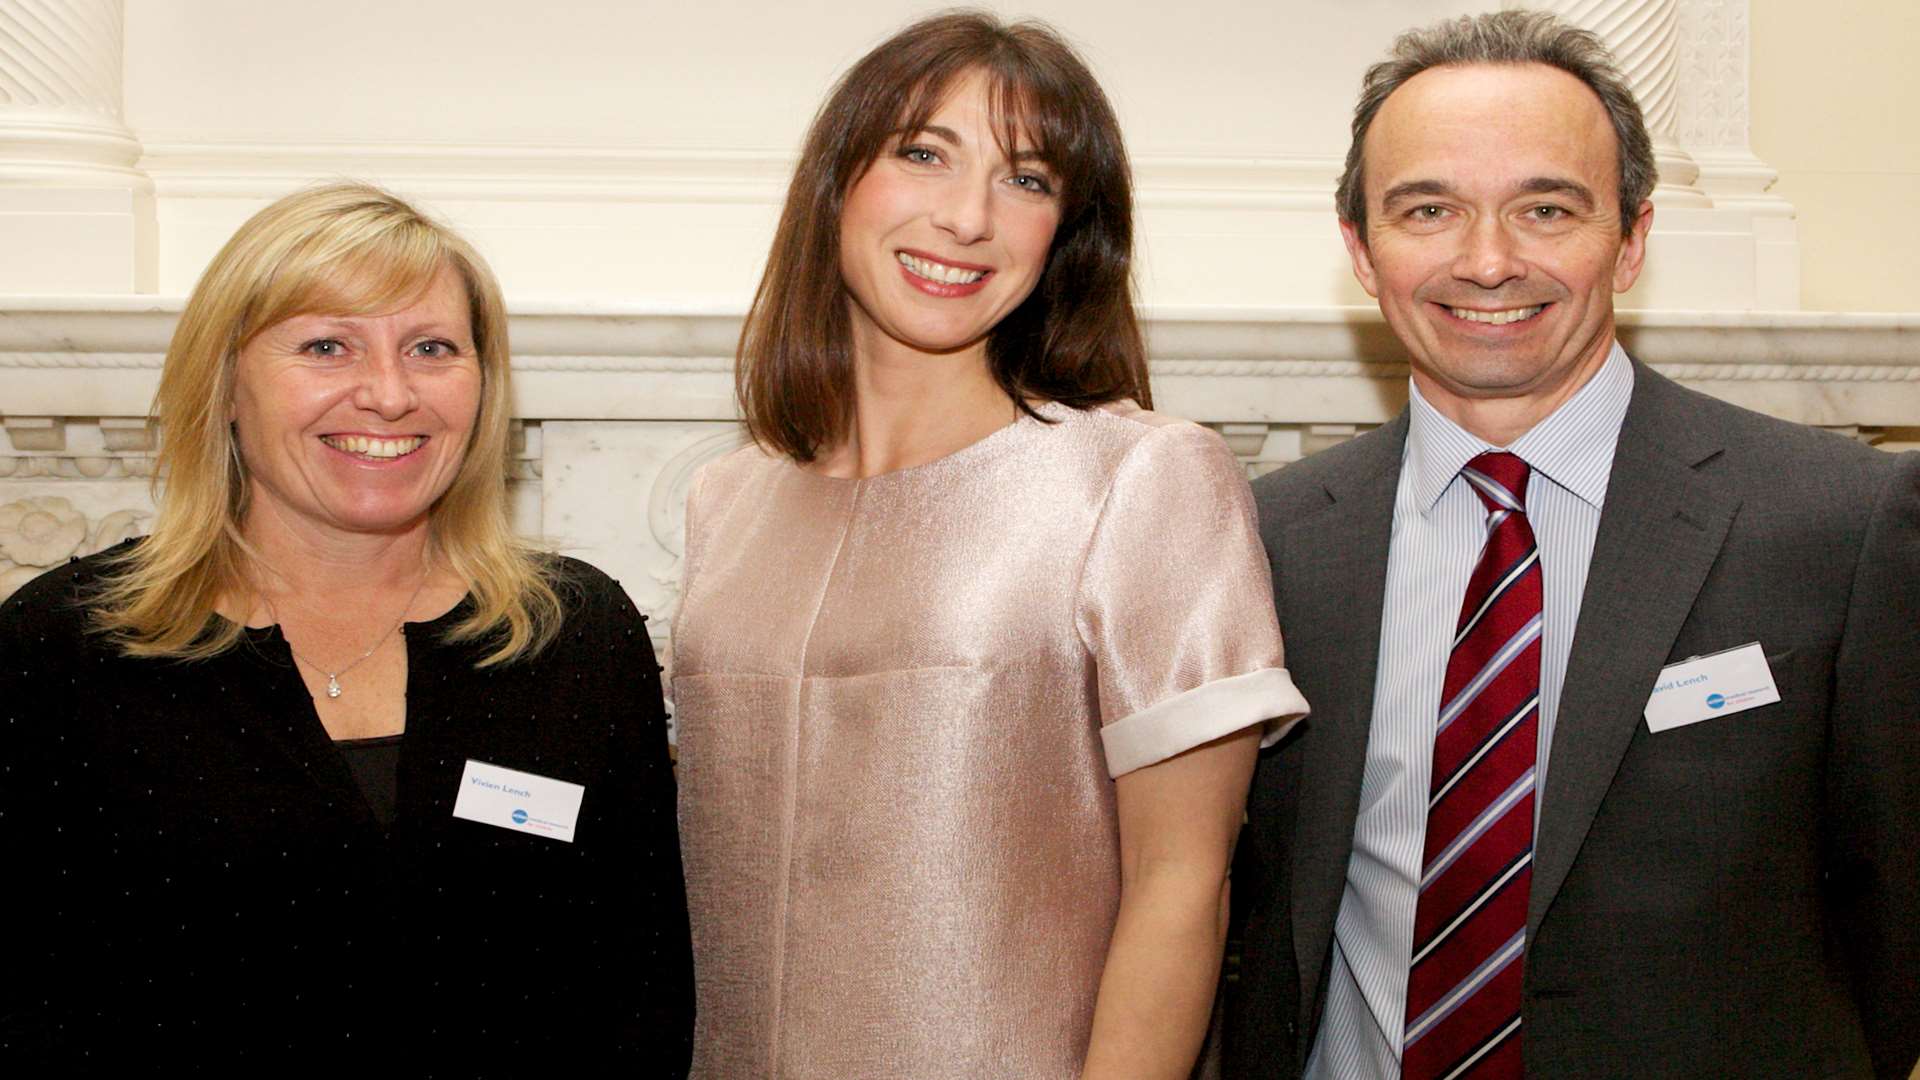 Ward & Partners managing director David Lench and his wife Vivien with Samantha Cameron